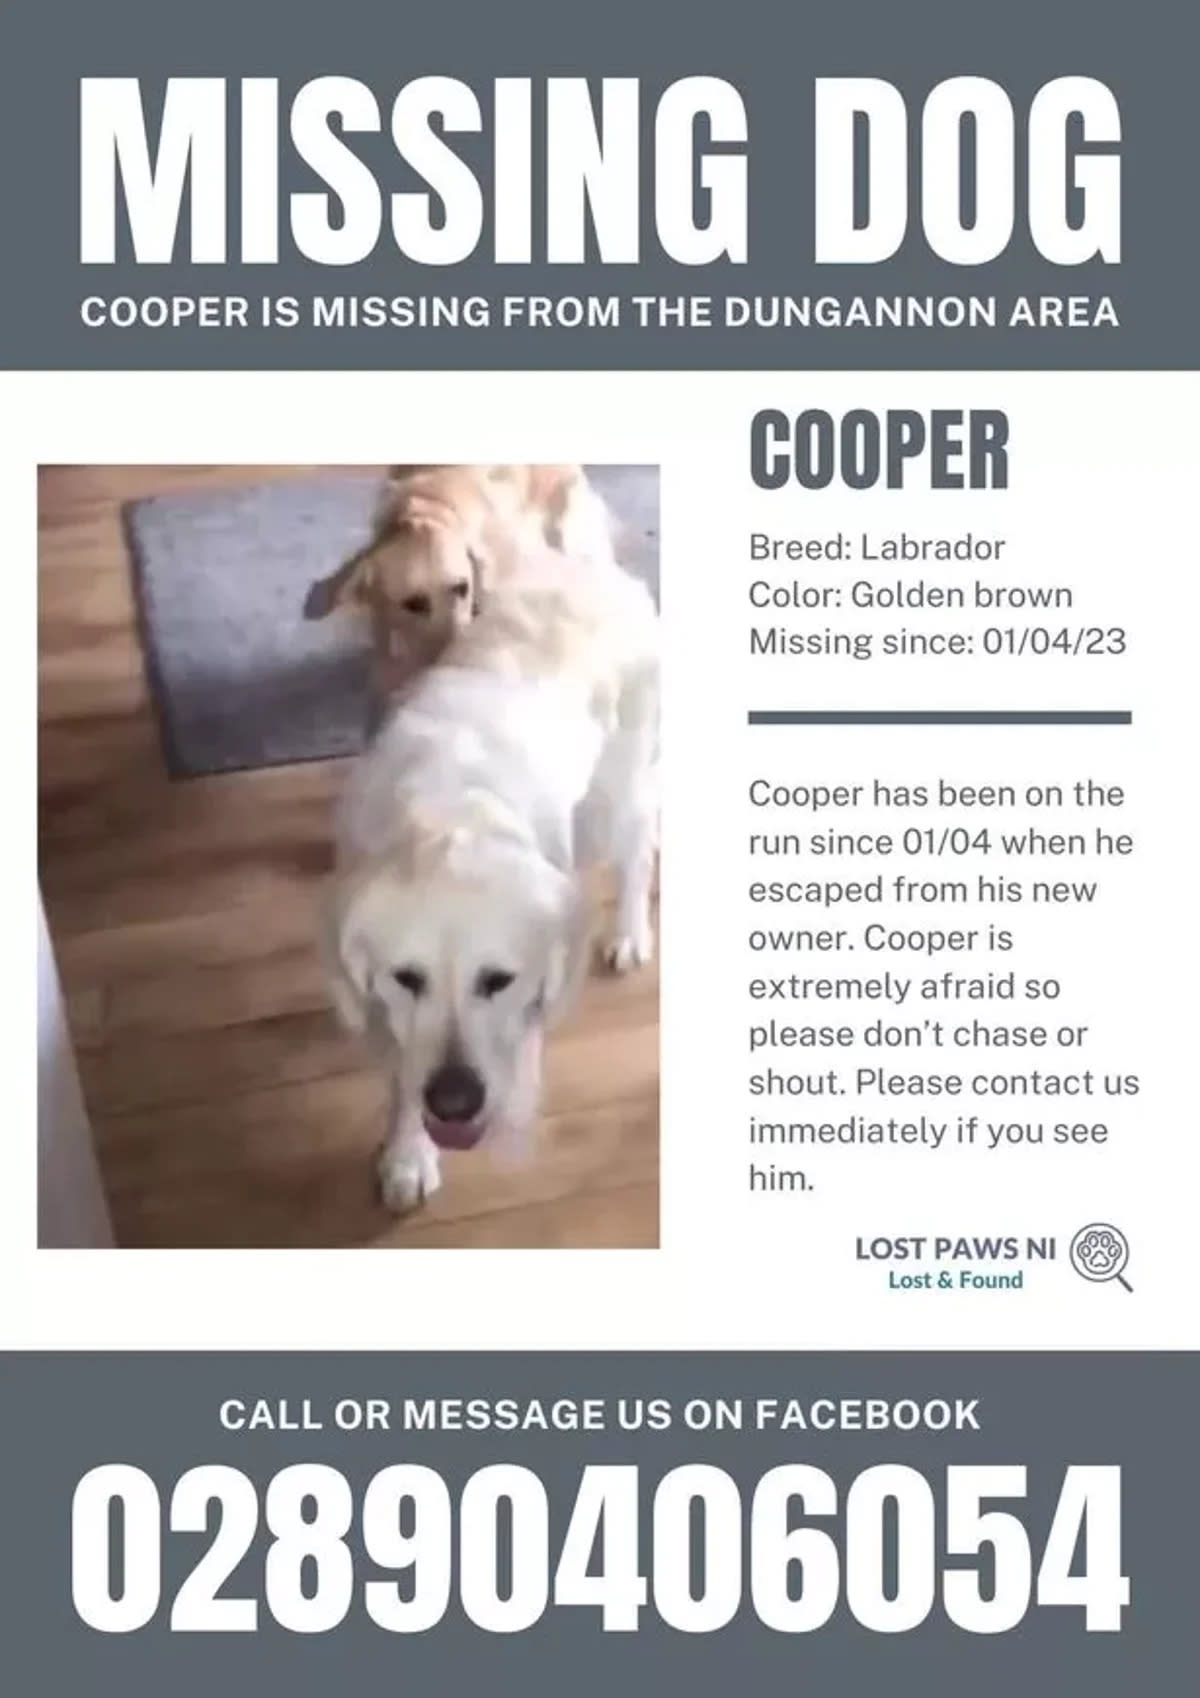 Posters were widely spread in hope of finding Cooper while he was still missing (Lost Paws NI)